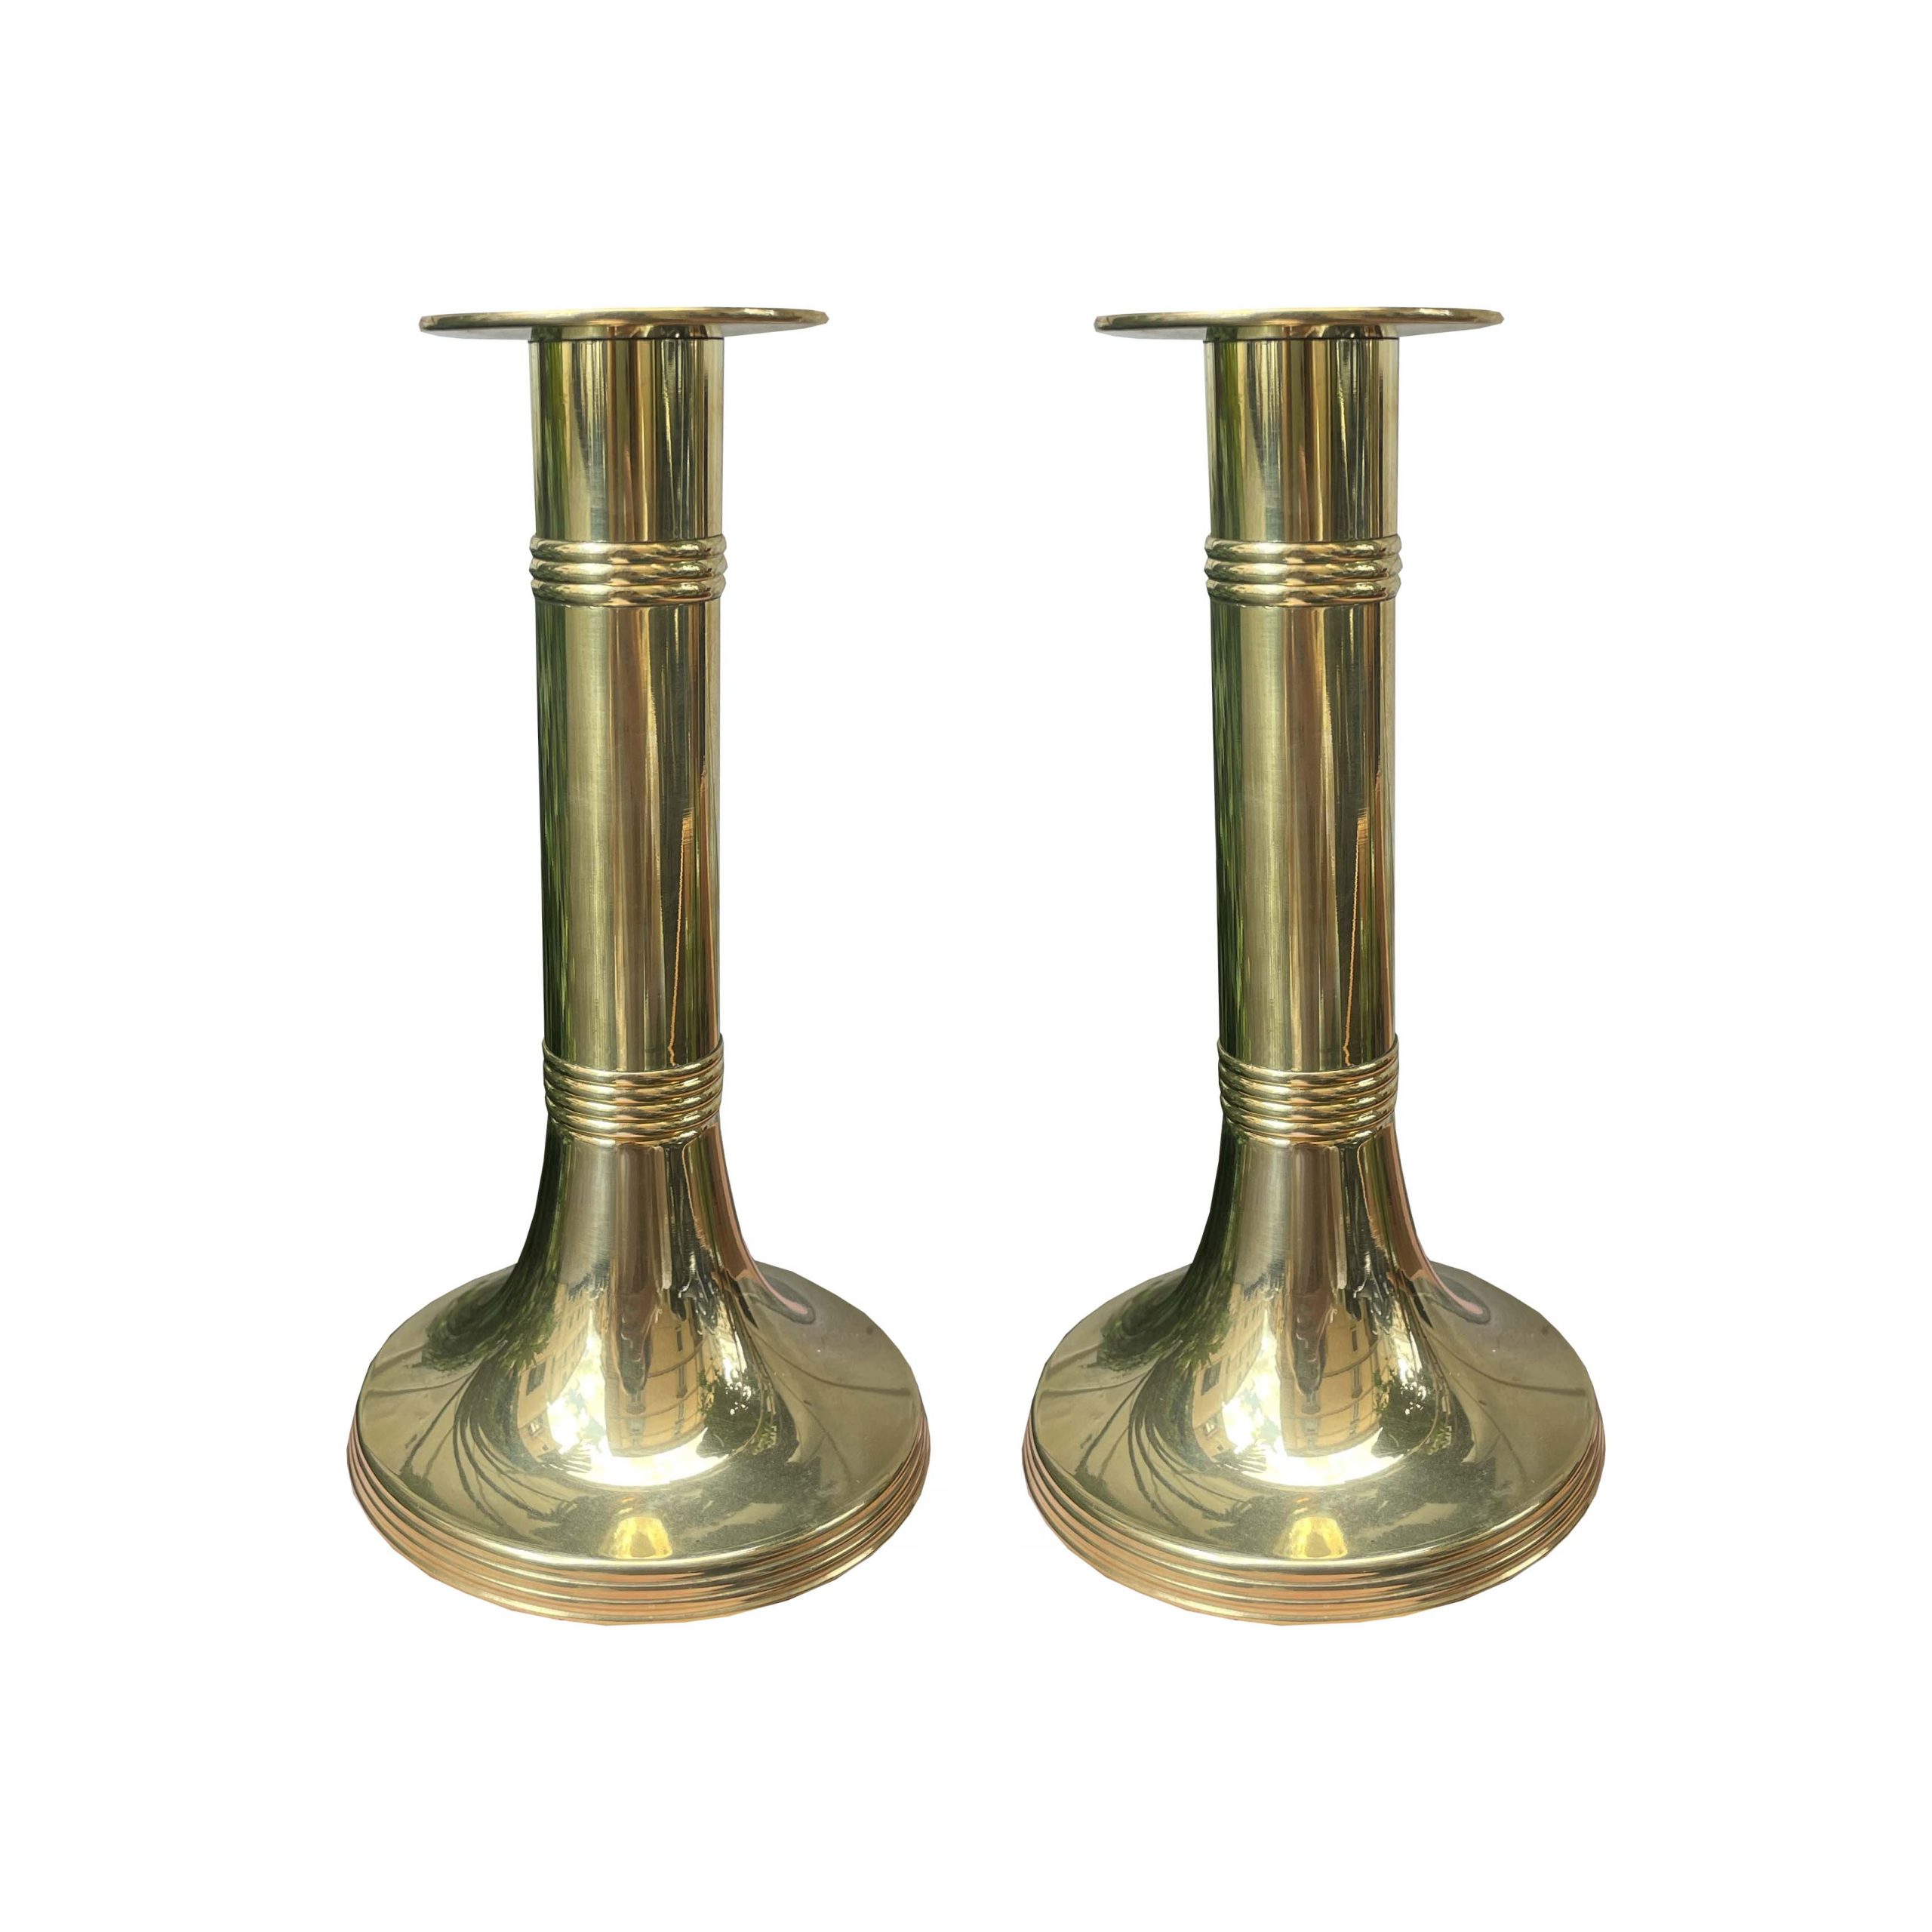 Bronze Candle Holders for All the people